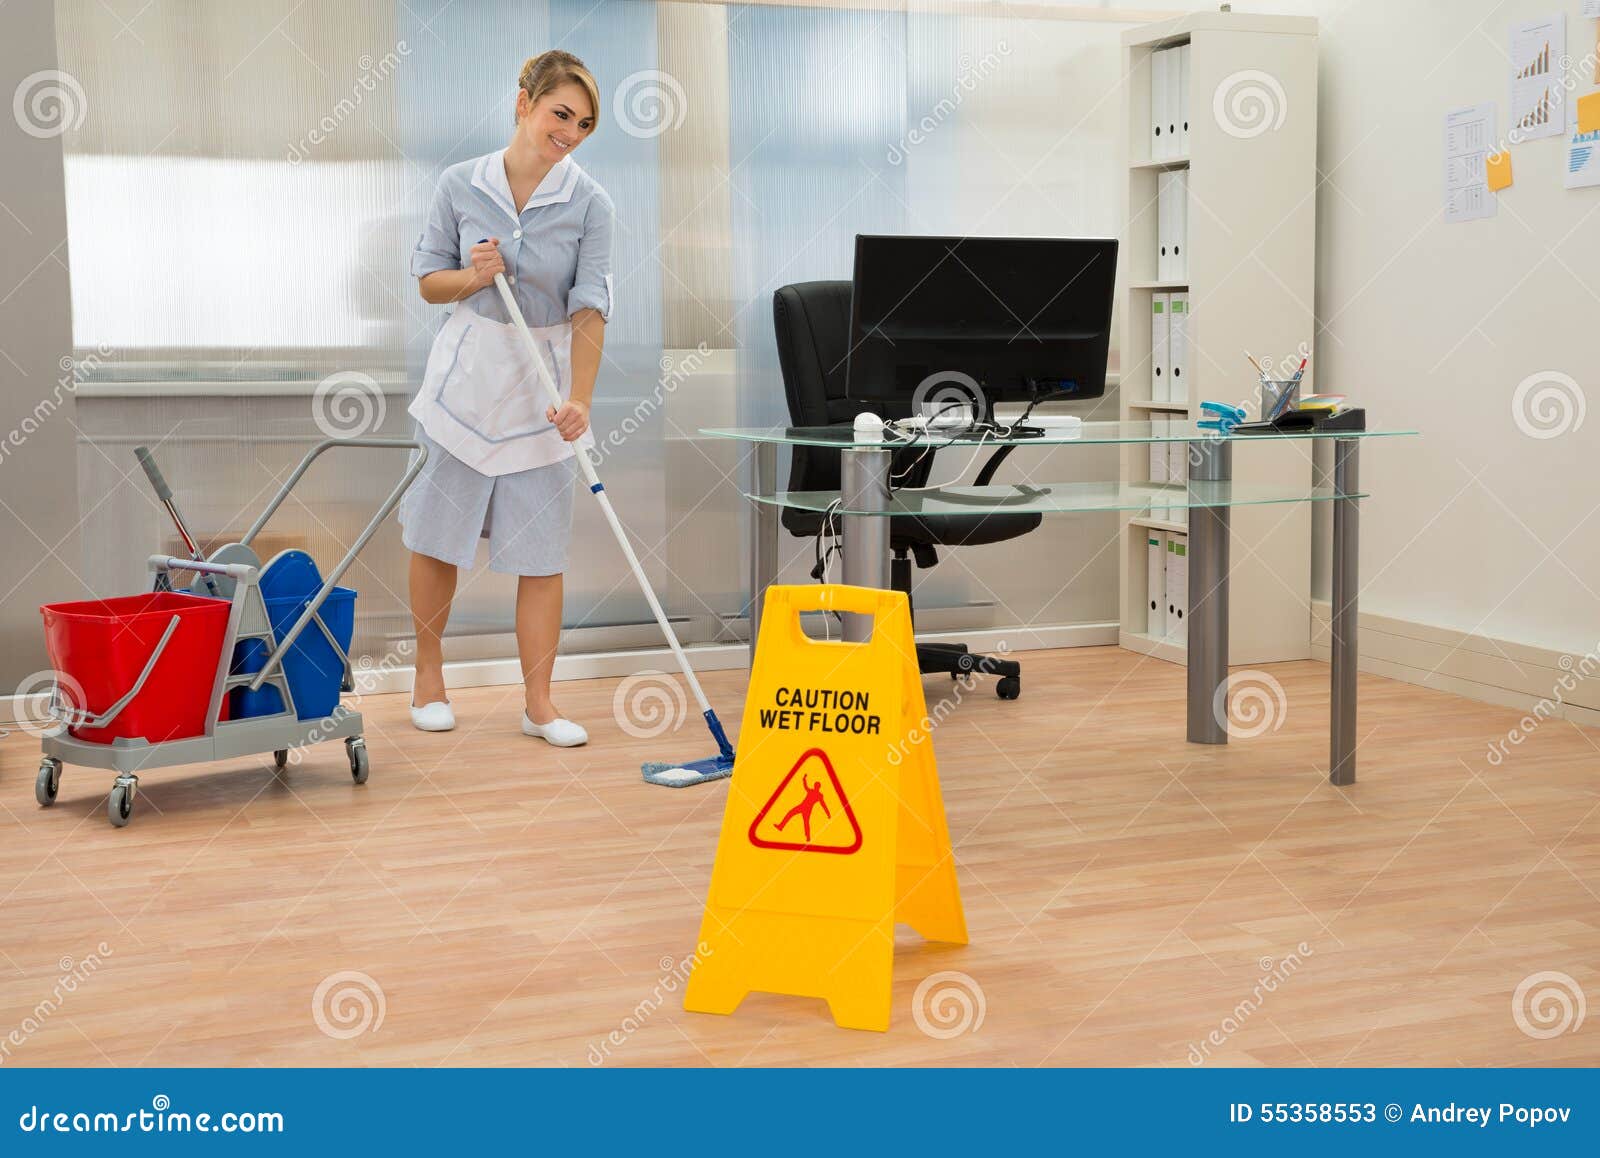 Maid Cleaning Floor in Office Stock Image - Image of lifestyle, desktop:  55358553